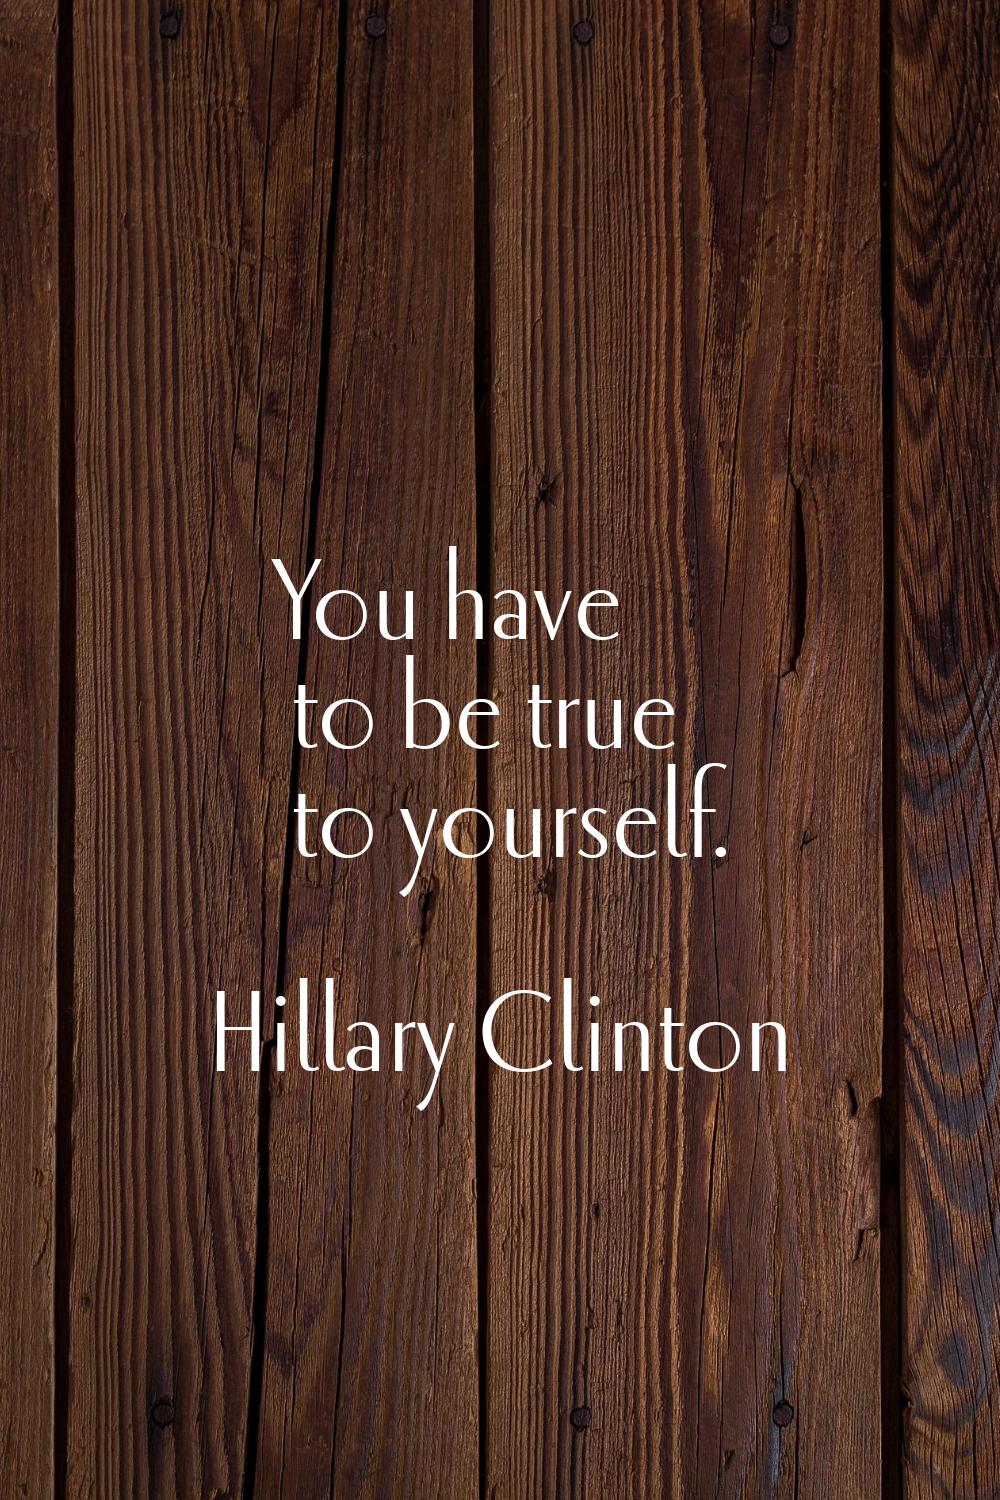 You have to be true to yourself.